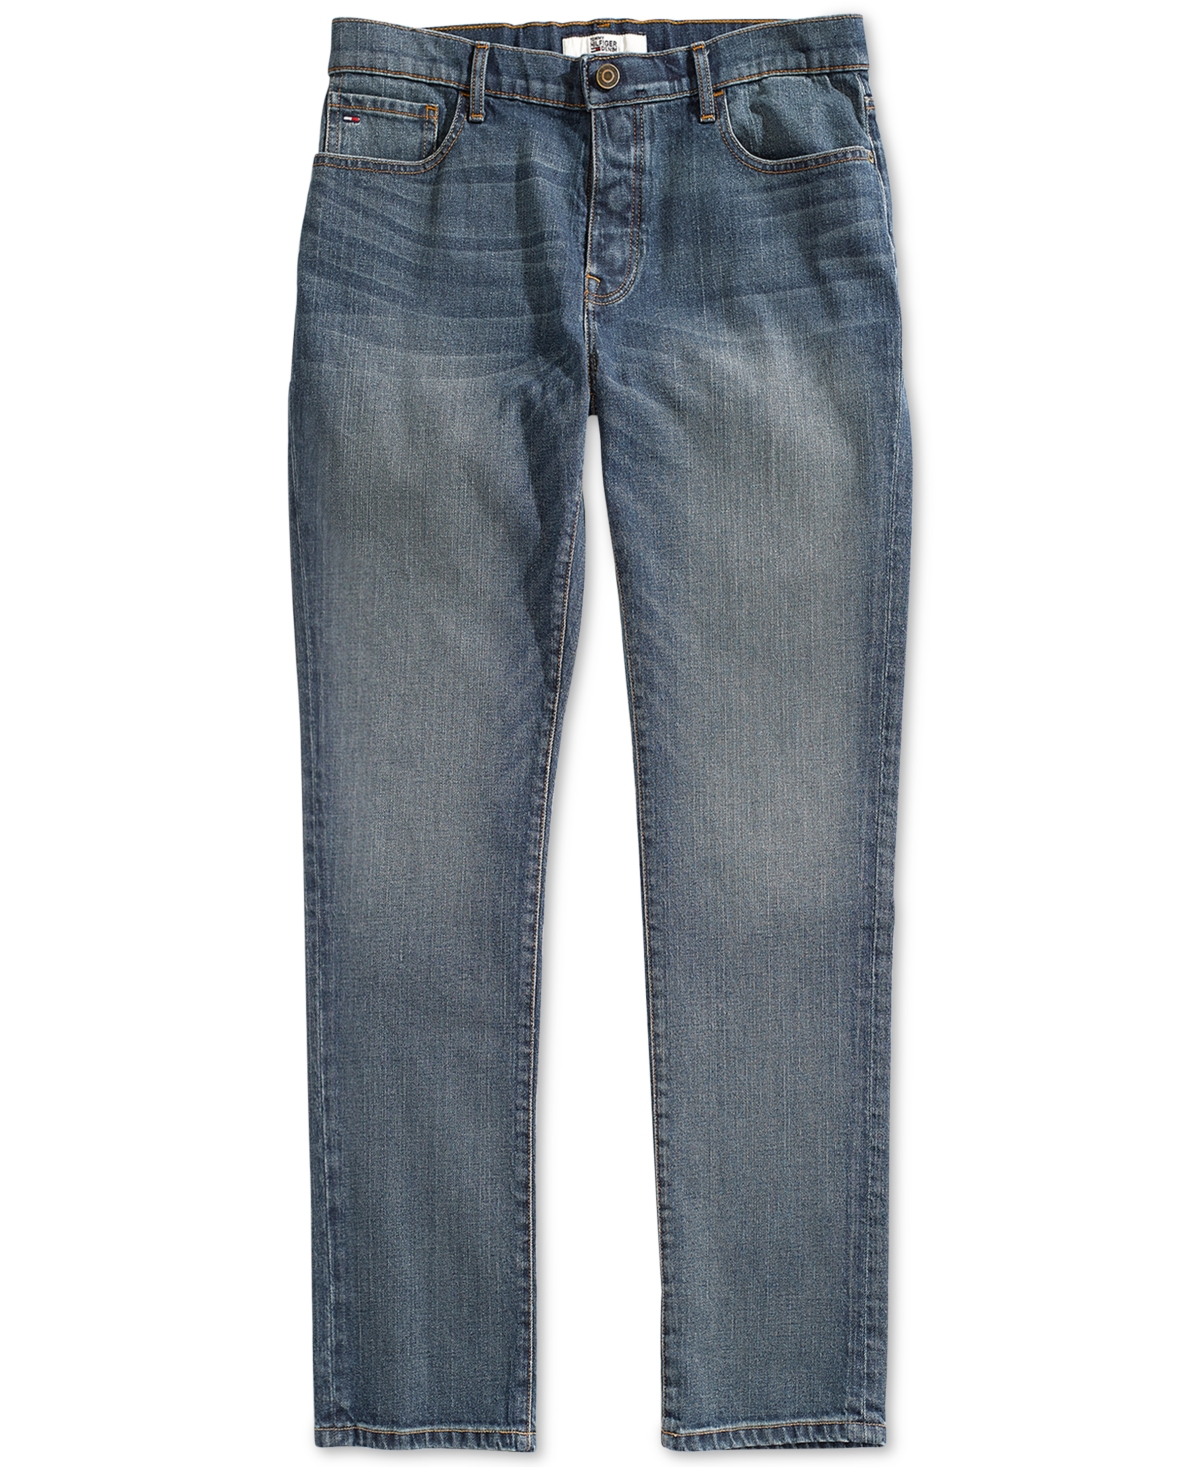 Tommy Hilfiger Adaptive Men's Straight Fit Jeans with Magnetic Fly